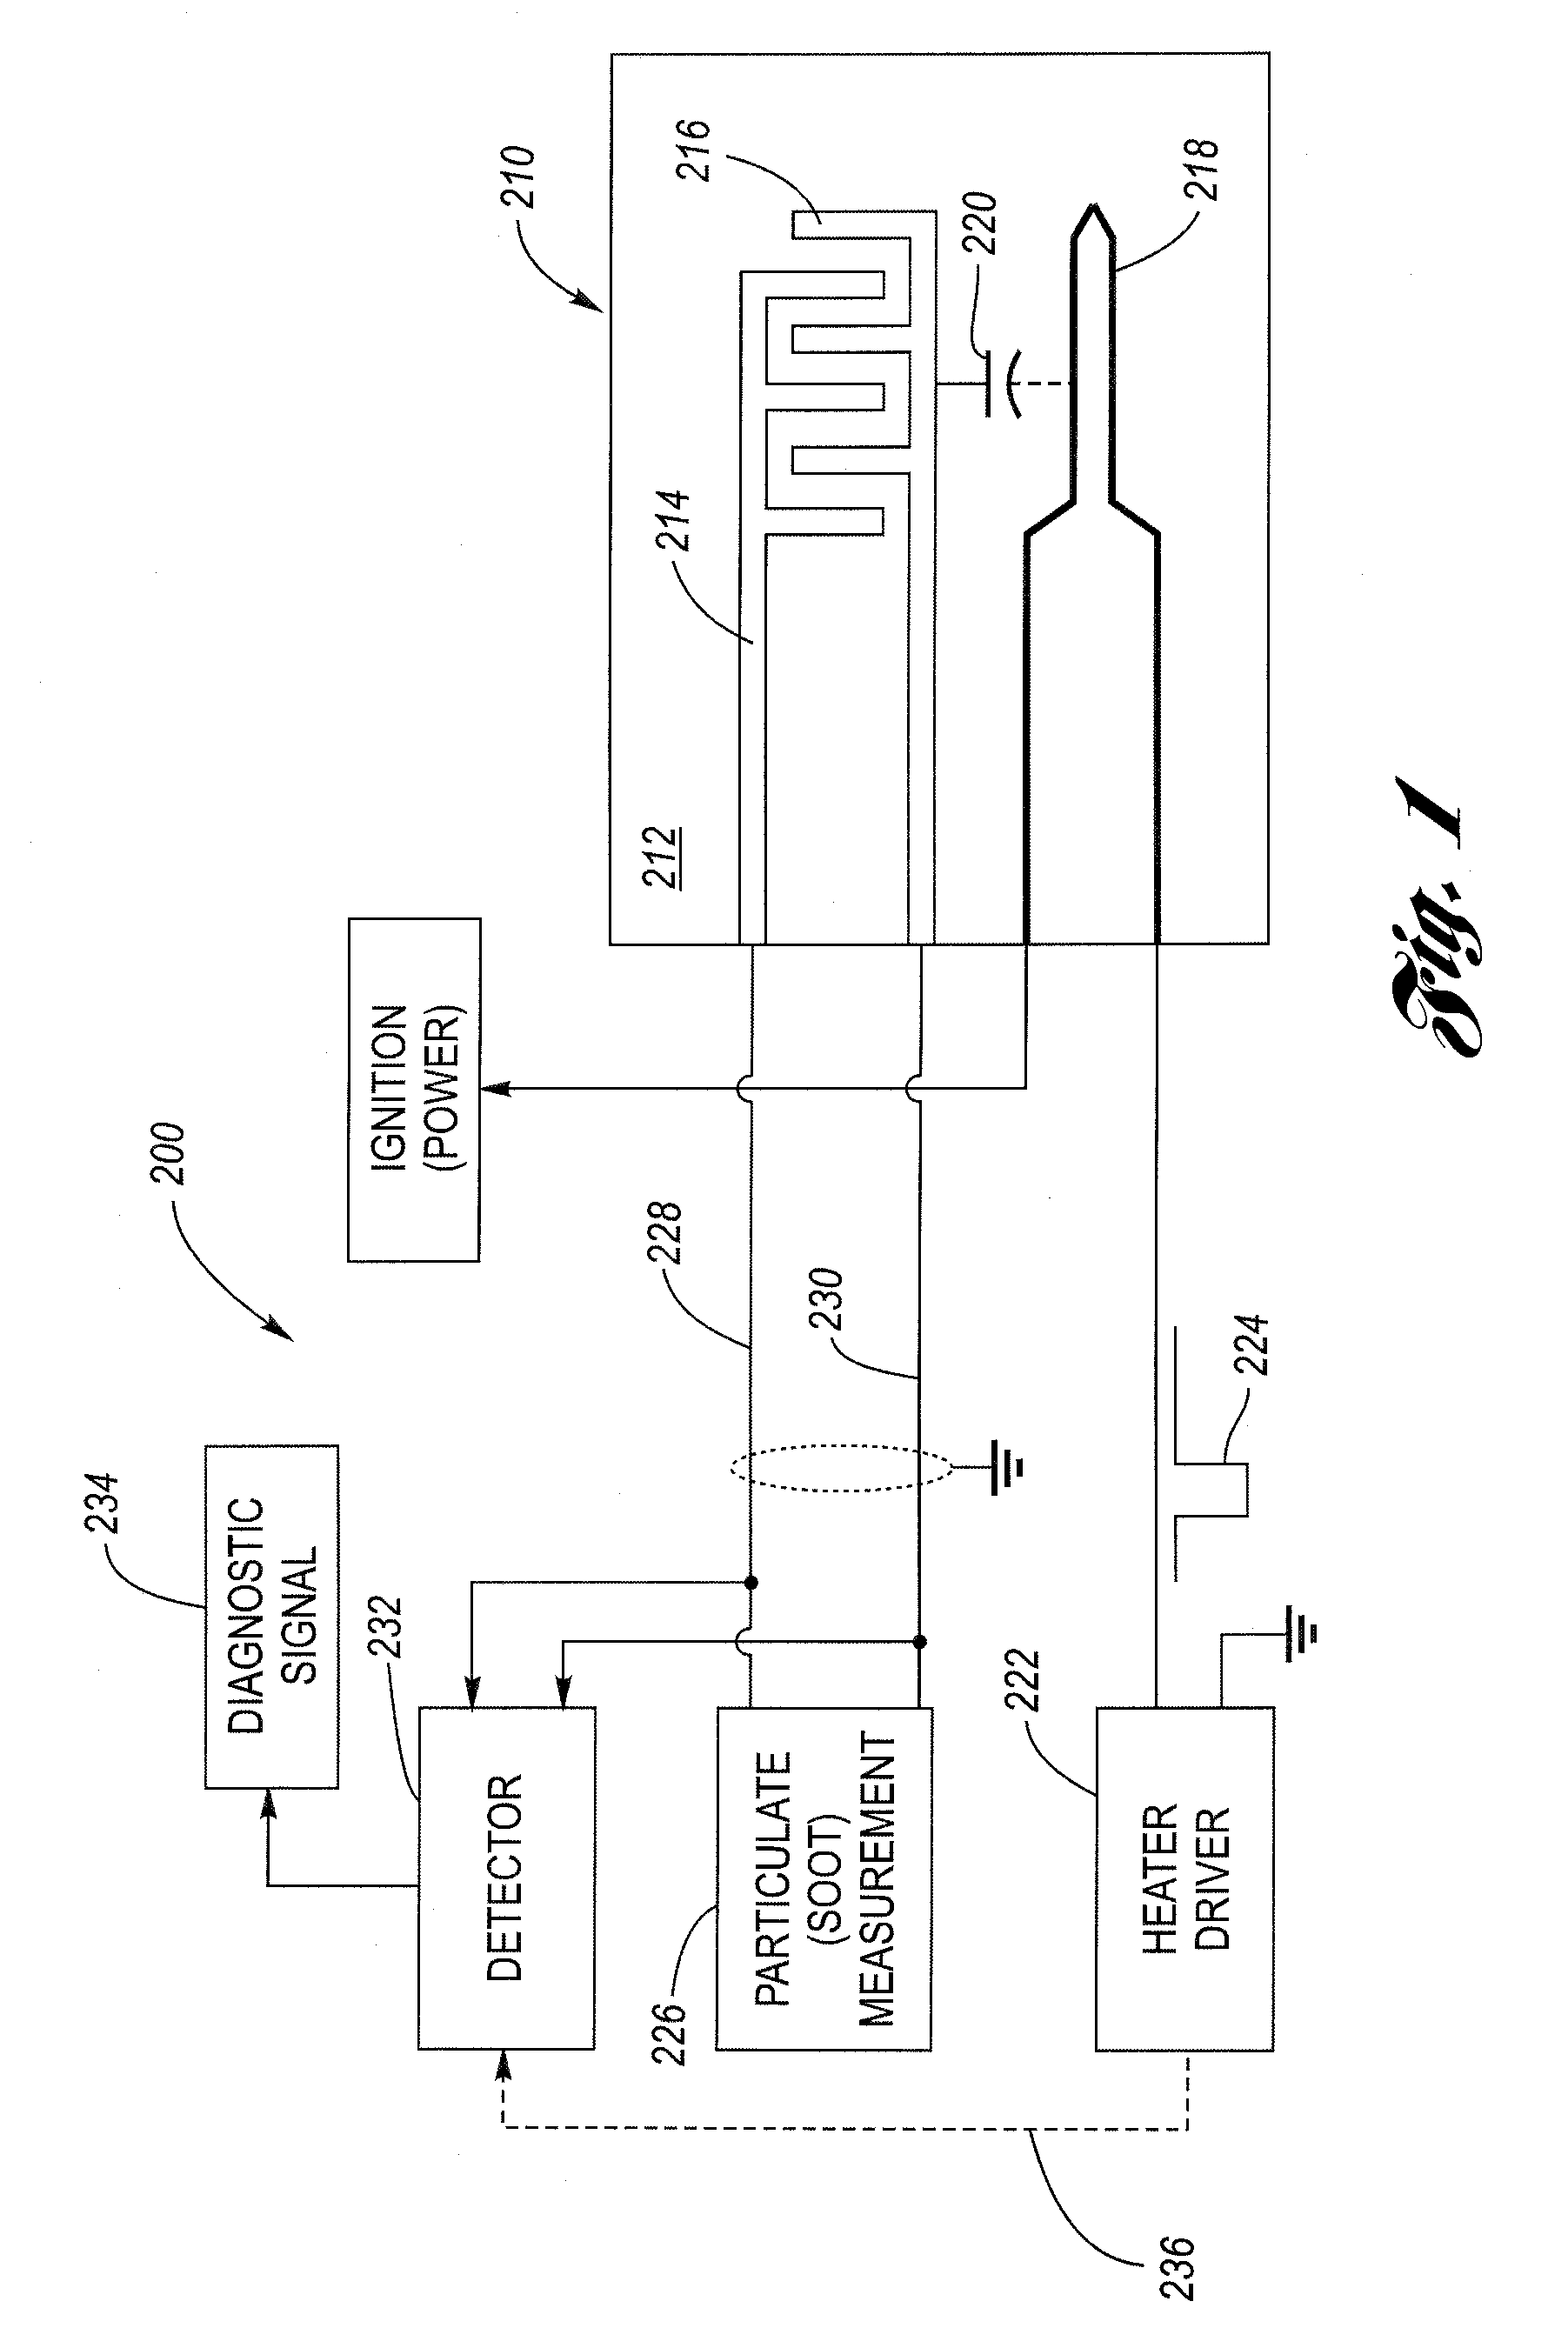 System and method for particulate sensor diagnostic